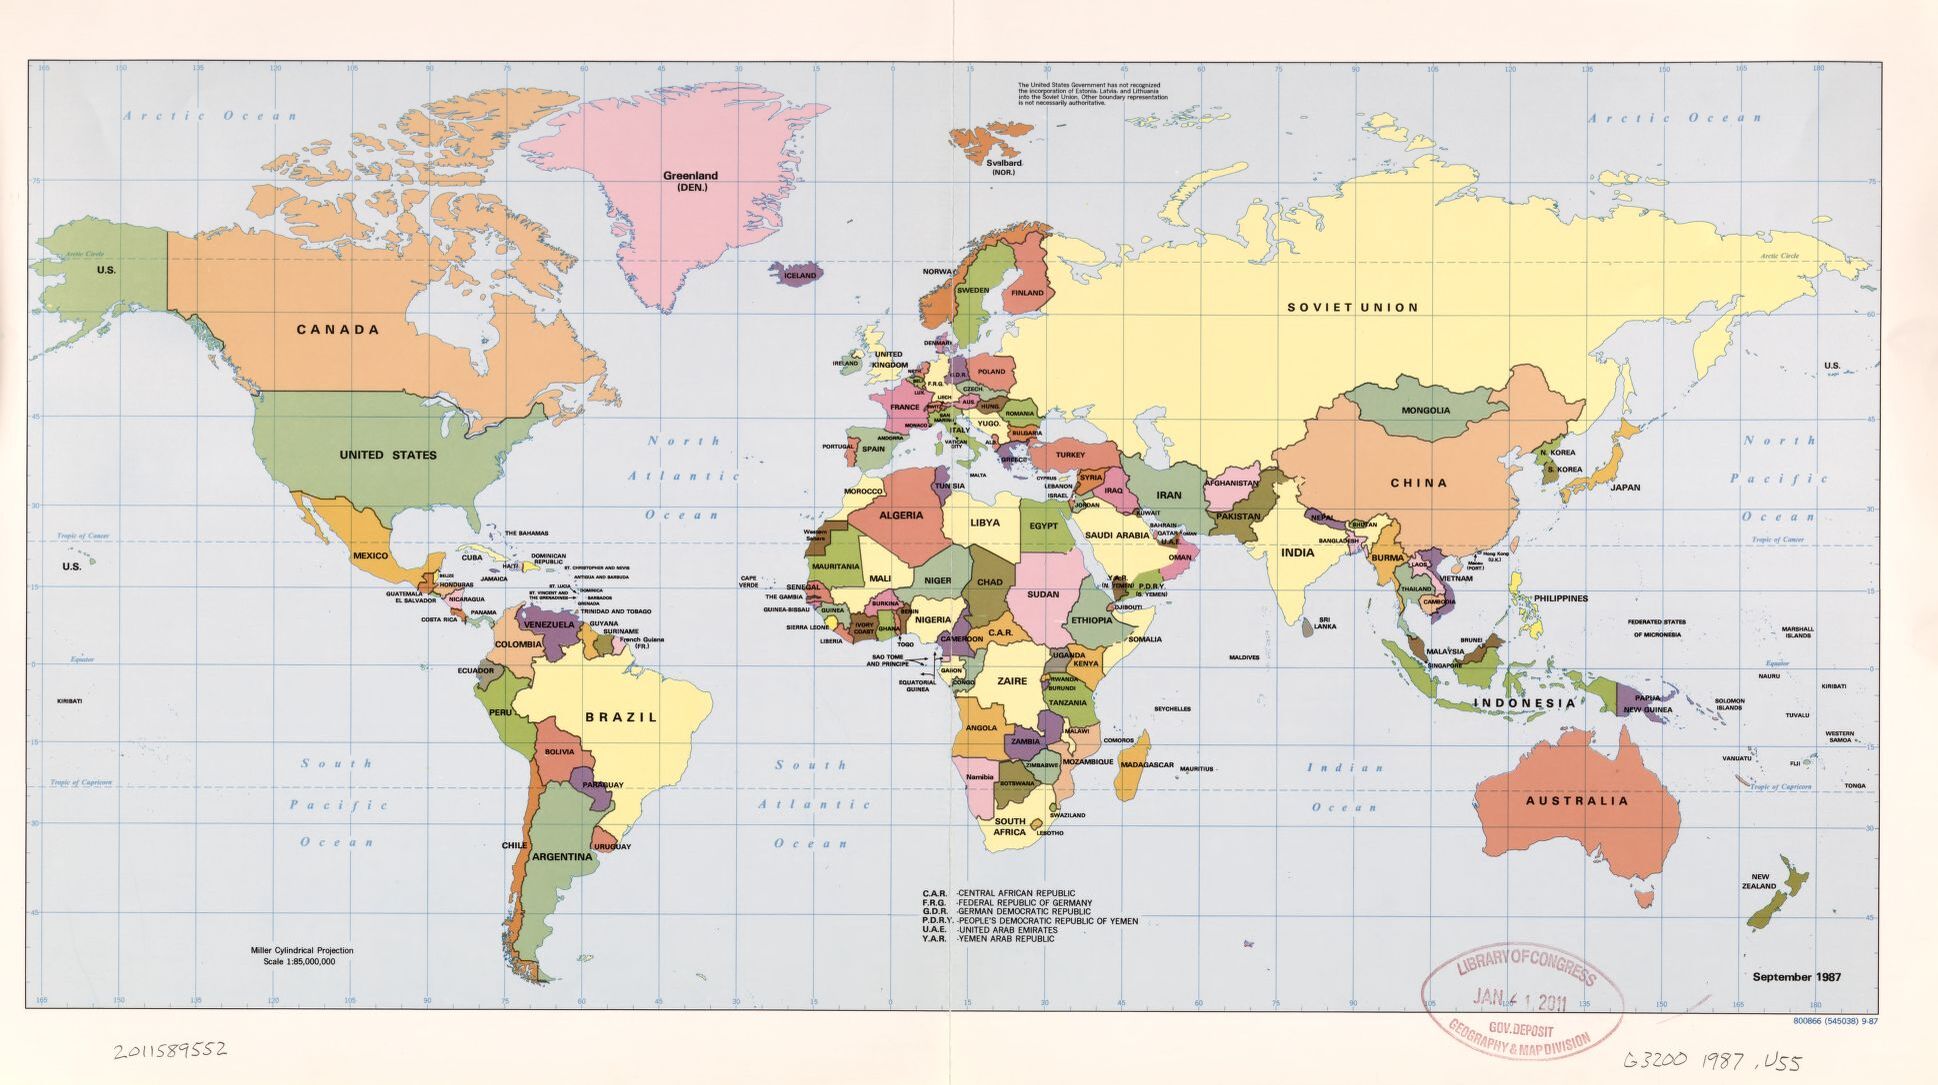 The World Political Map  | September 1987 | Large, Printable Downloadable Map